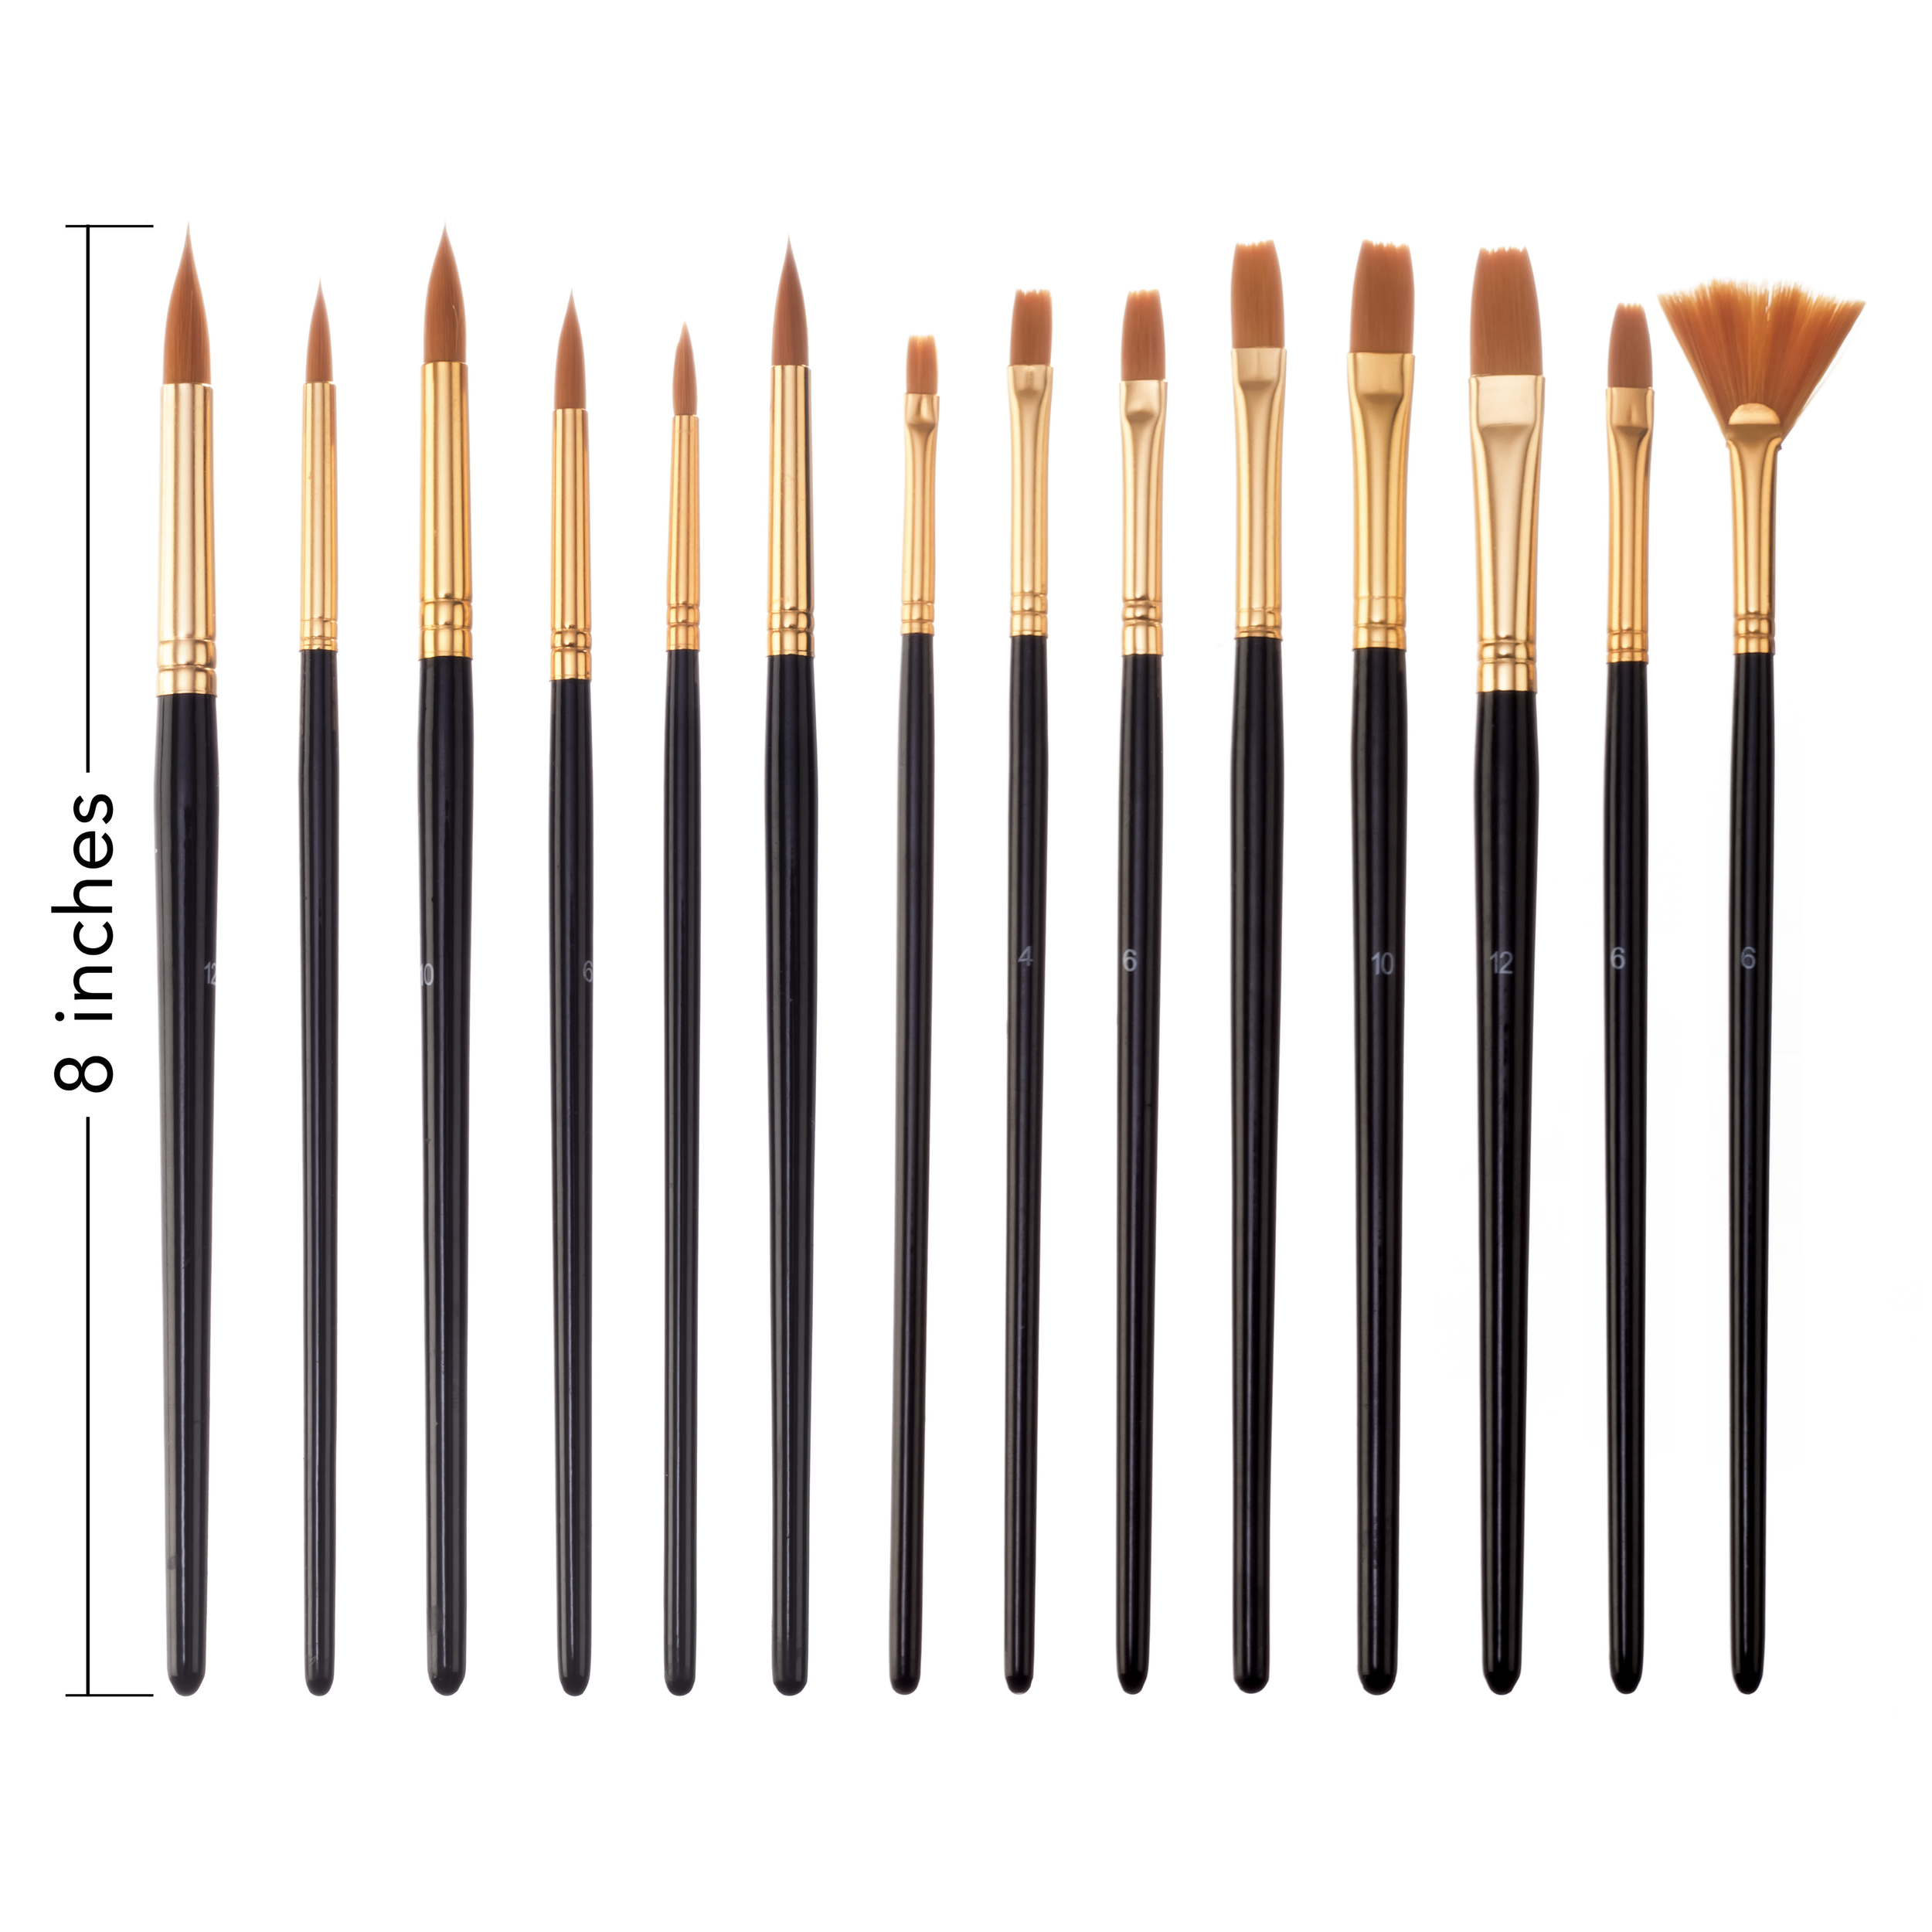  Jerry Q Art 24 Pcs Artist Paint Brush Set with Free Carry Pouch  for Watercolor, Acrylic, Oil and All Media, Suitable for Canvas, Paper,  Ceramic, Golden Nylon Hair, Wood Handles JQ-B24